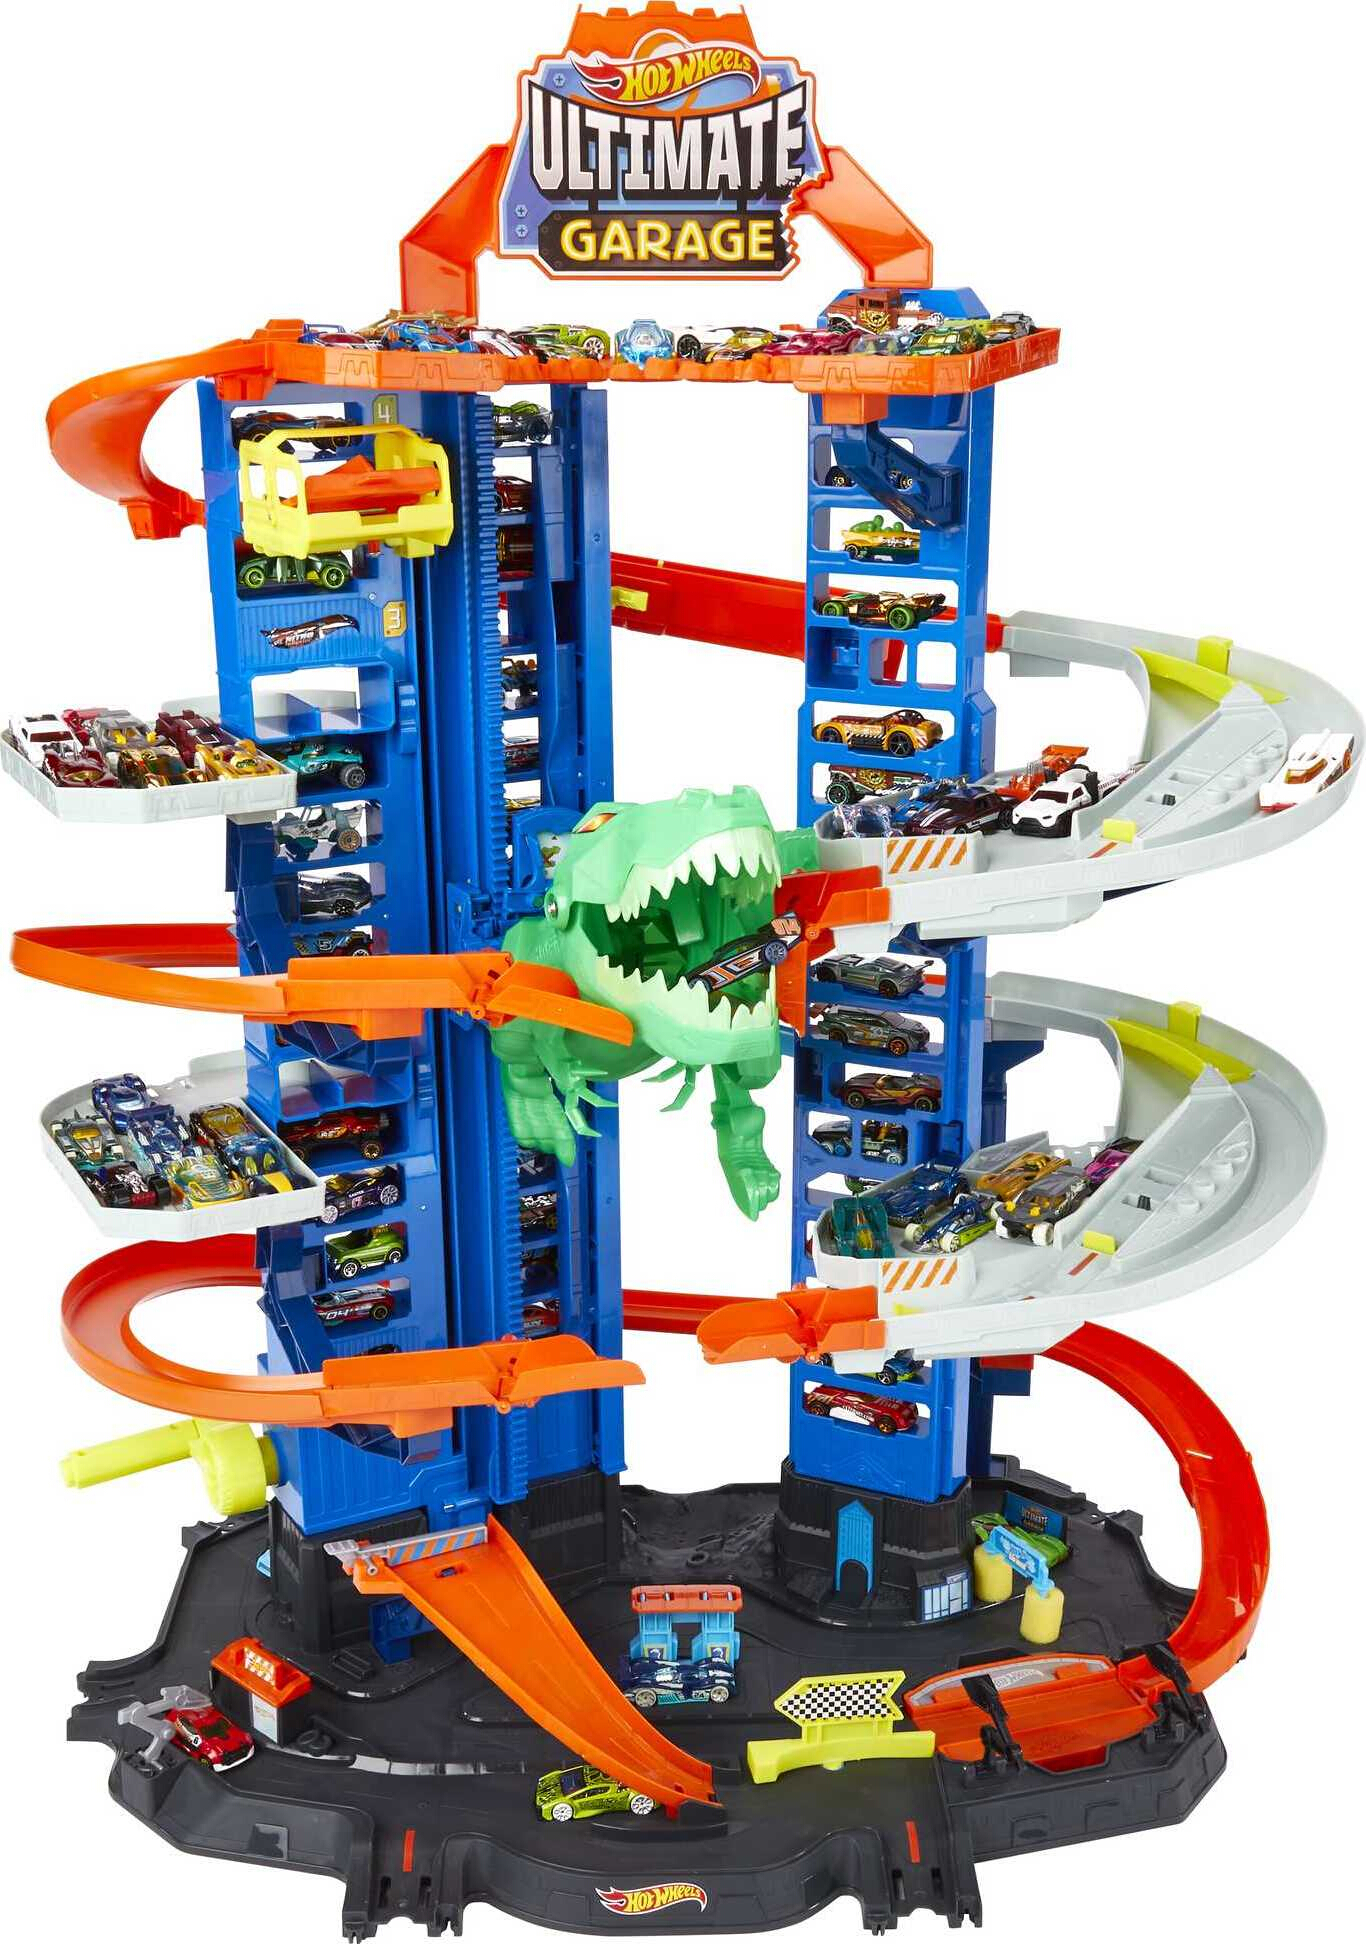 Hot Wheels HW Ultimate Garage Playset with 2 Toy Cars, Stores 100+ 1:64 Scale Vehicles - image 1 of 7